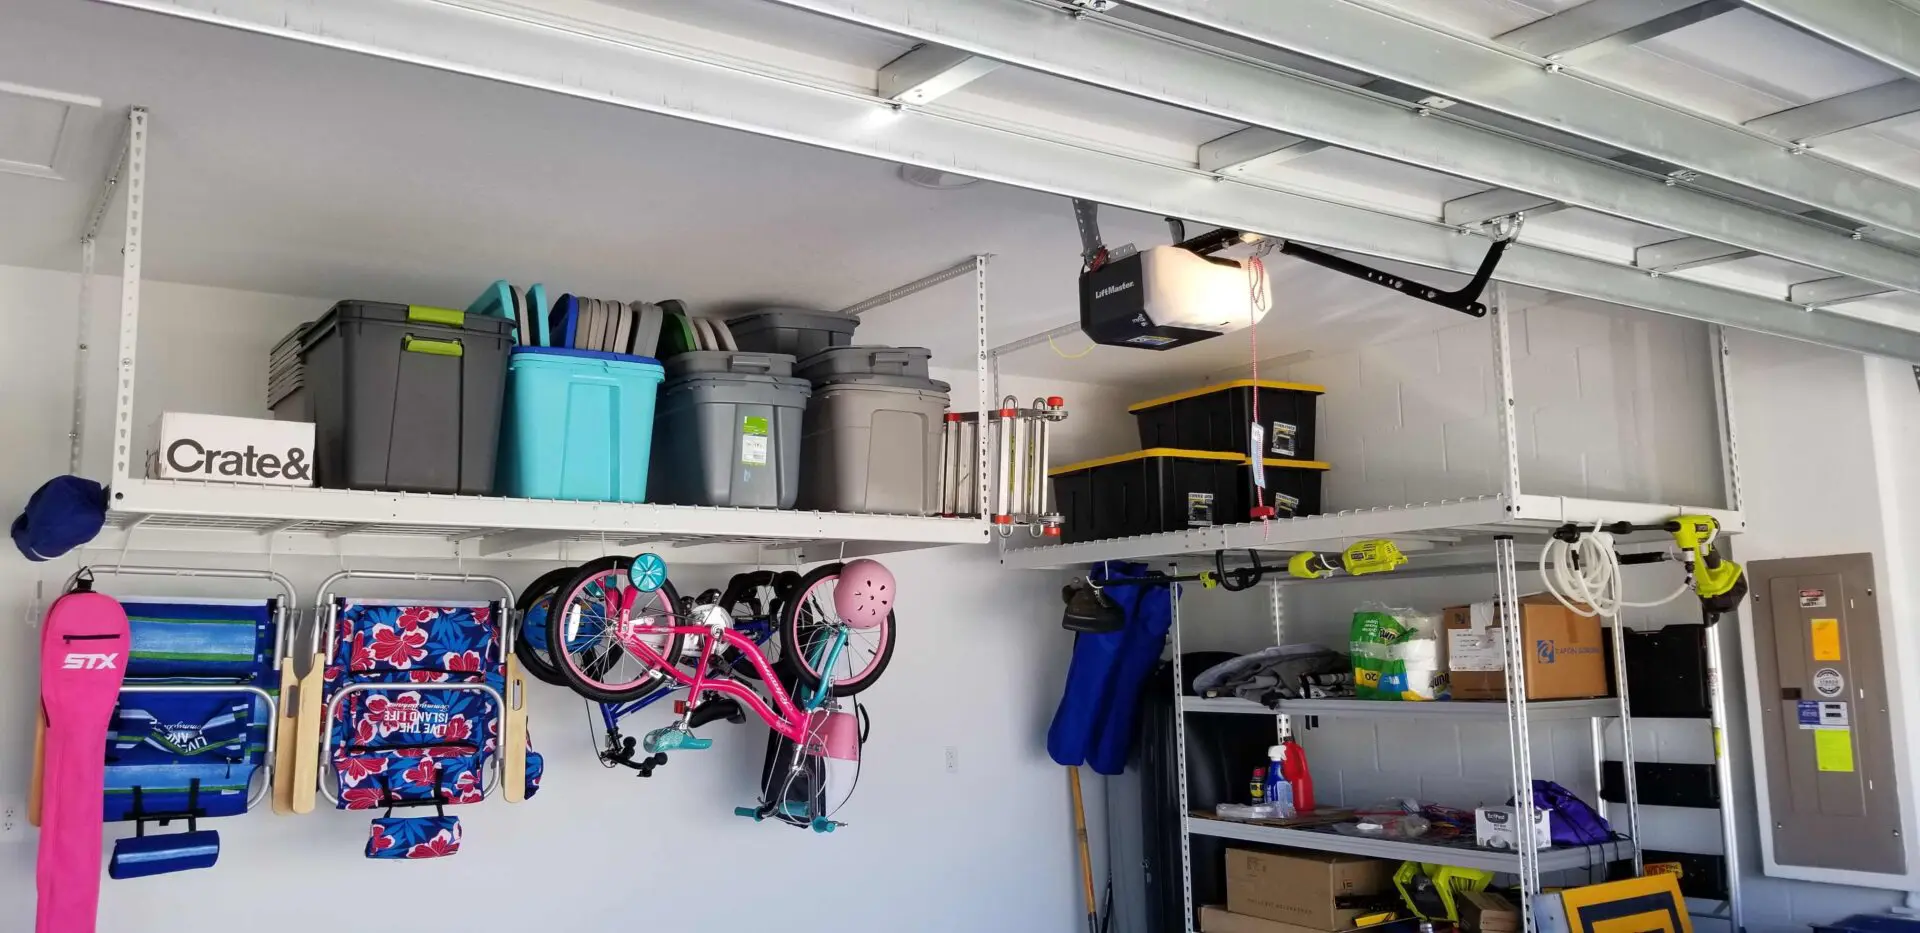 Crates and foldable ladders on the overhead storage, bicycles and chairs on the hooks